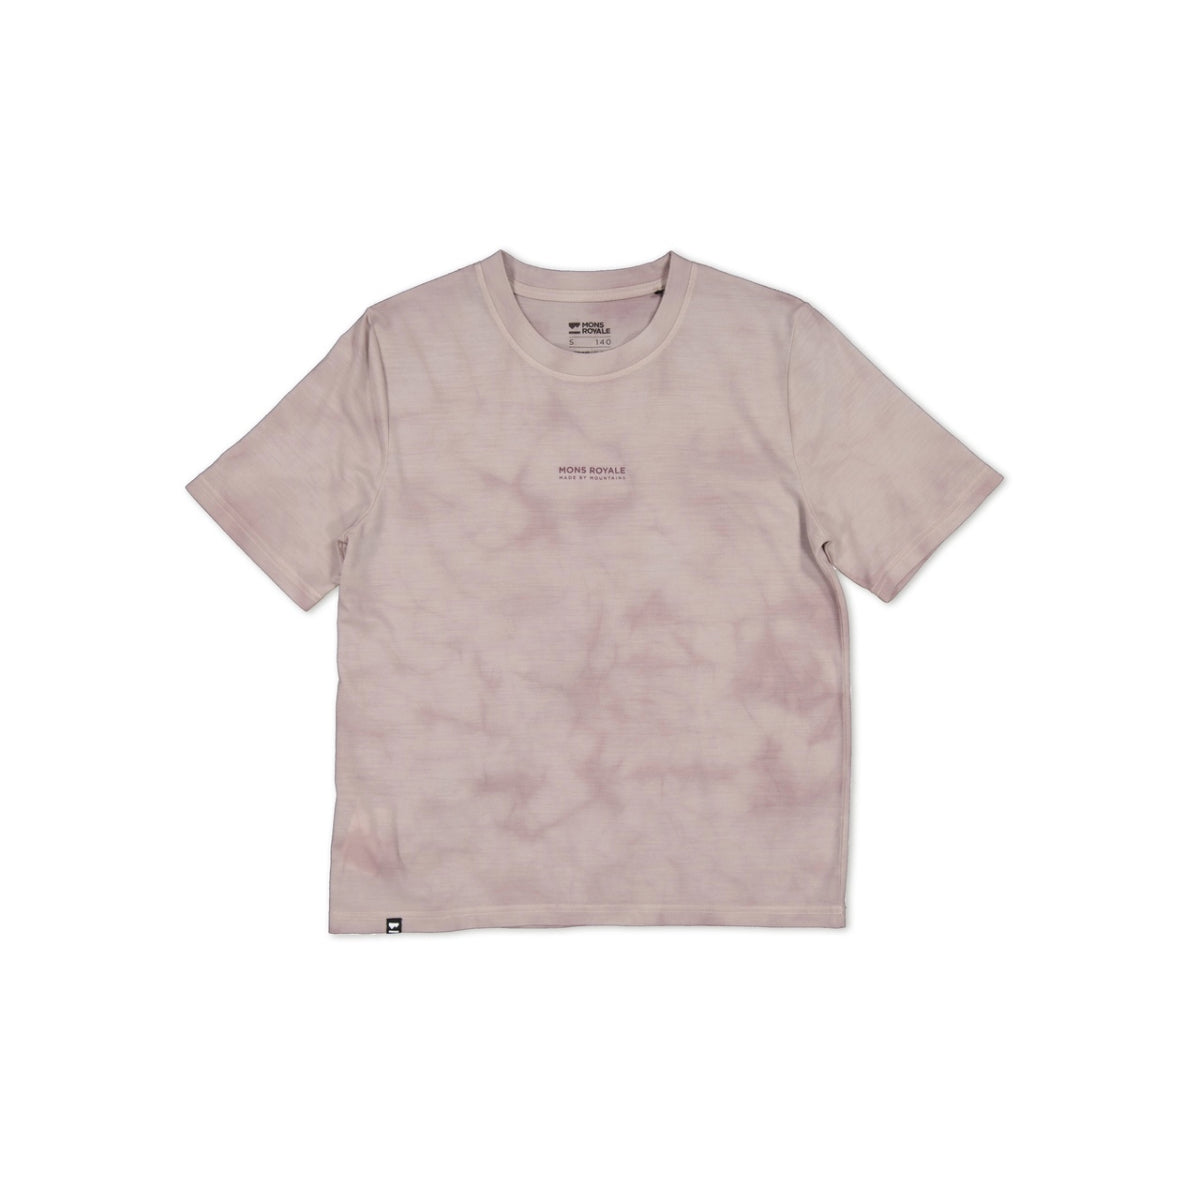 Mons Royale - Women's Icon Relaxed Tee Garment Dyed - Cloud Tie Dye